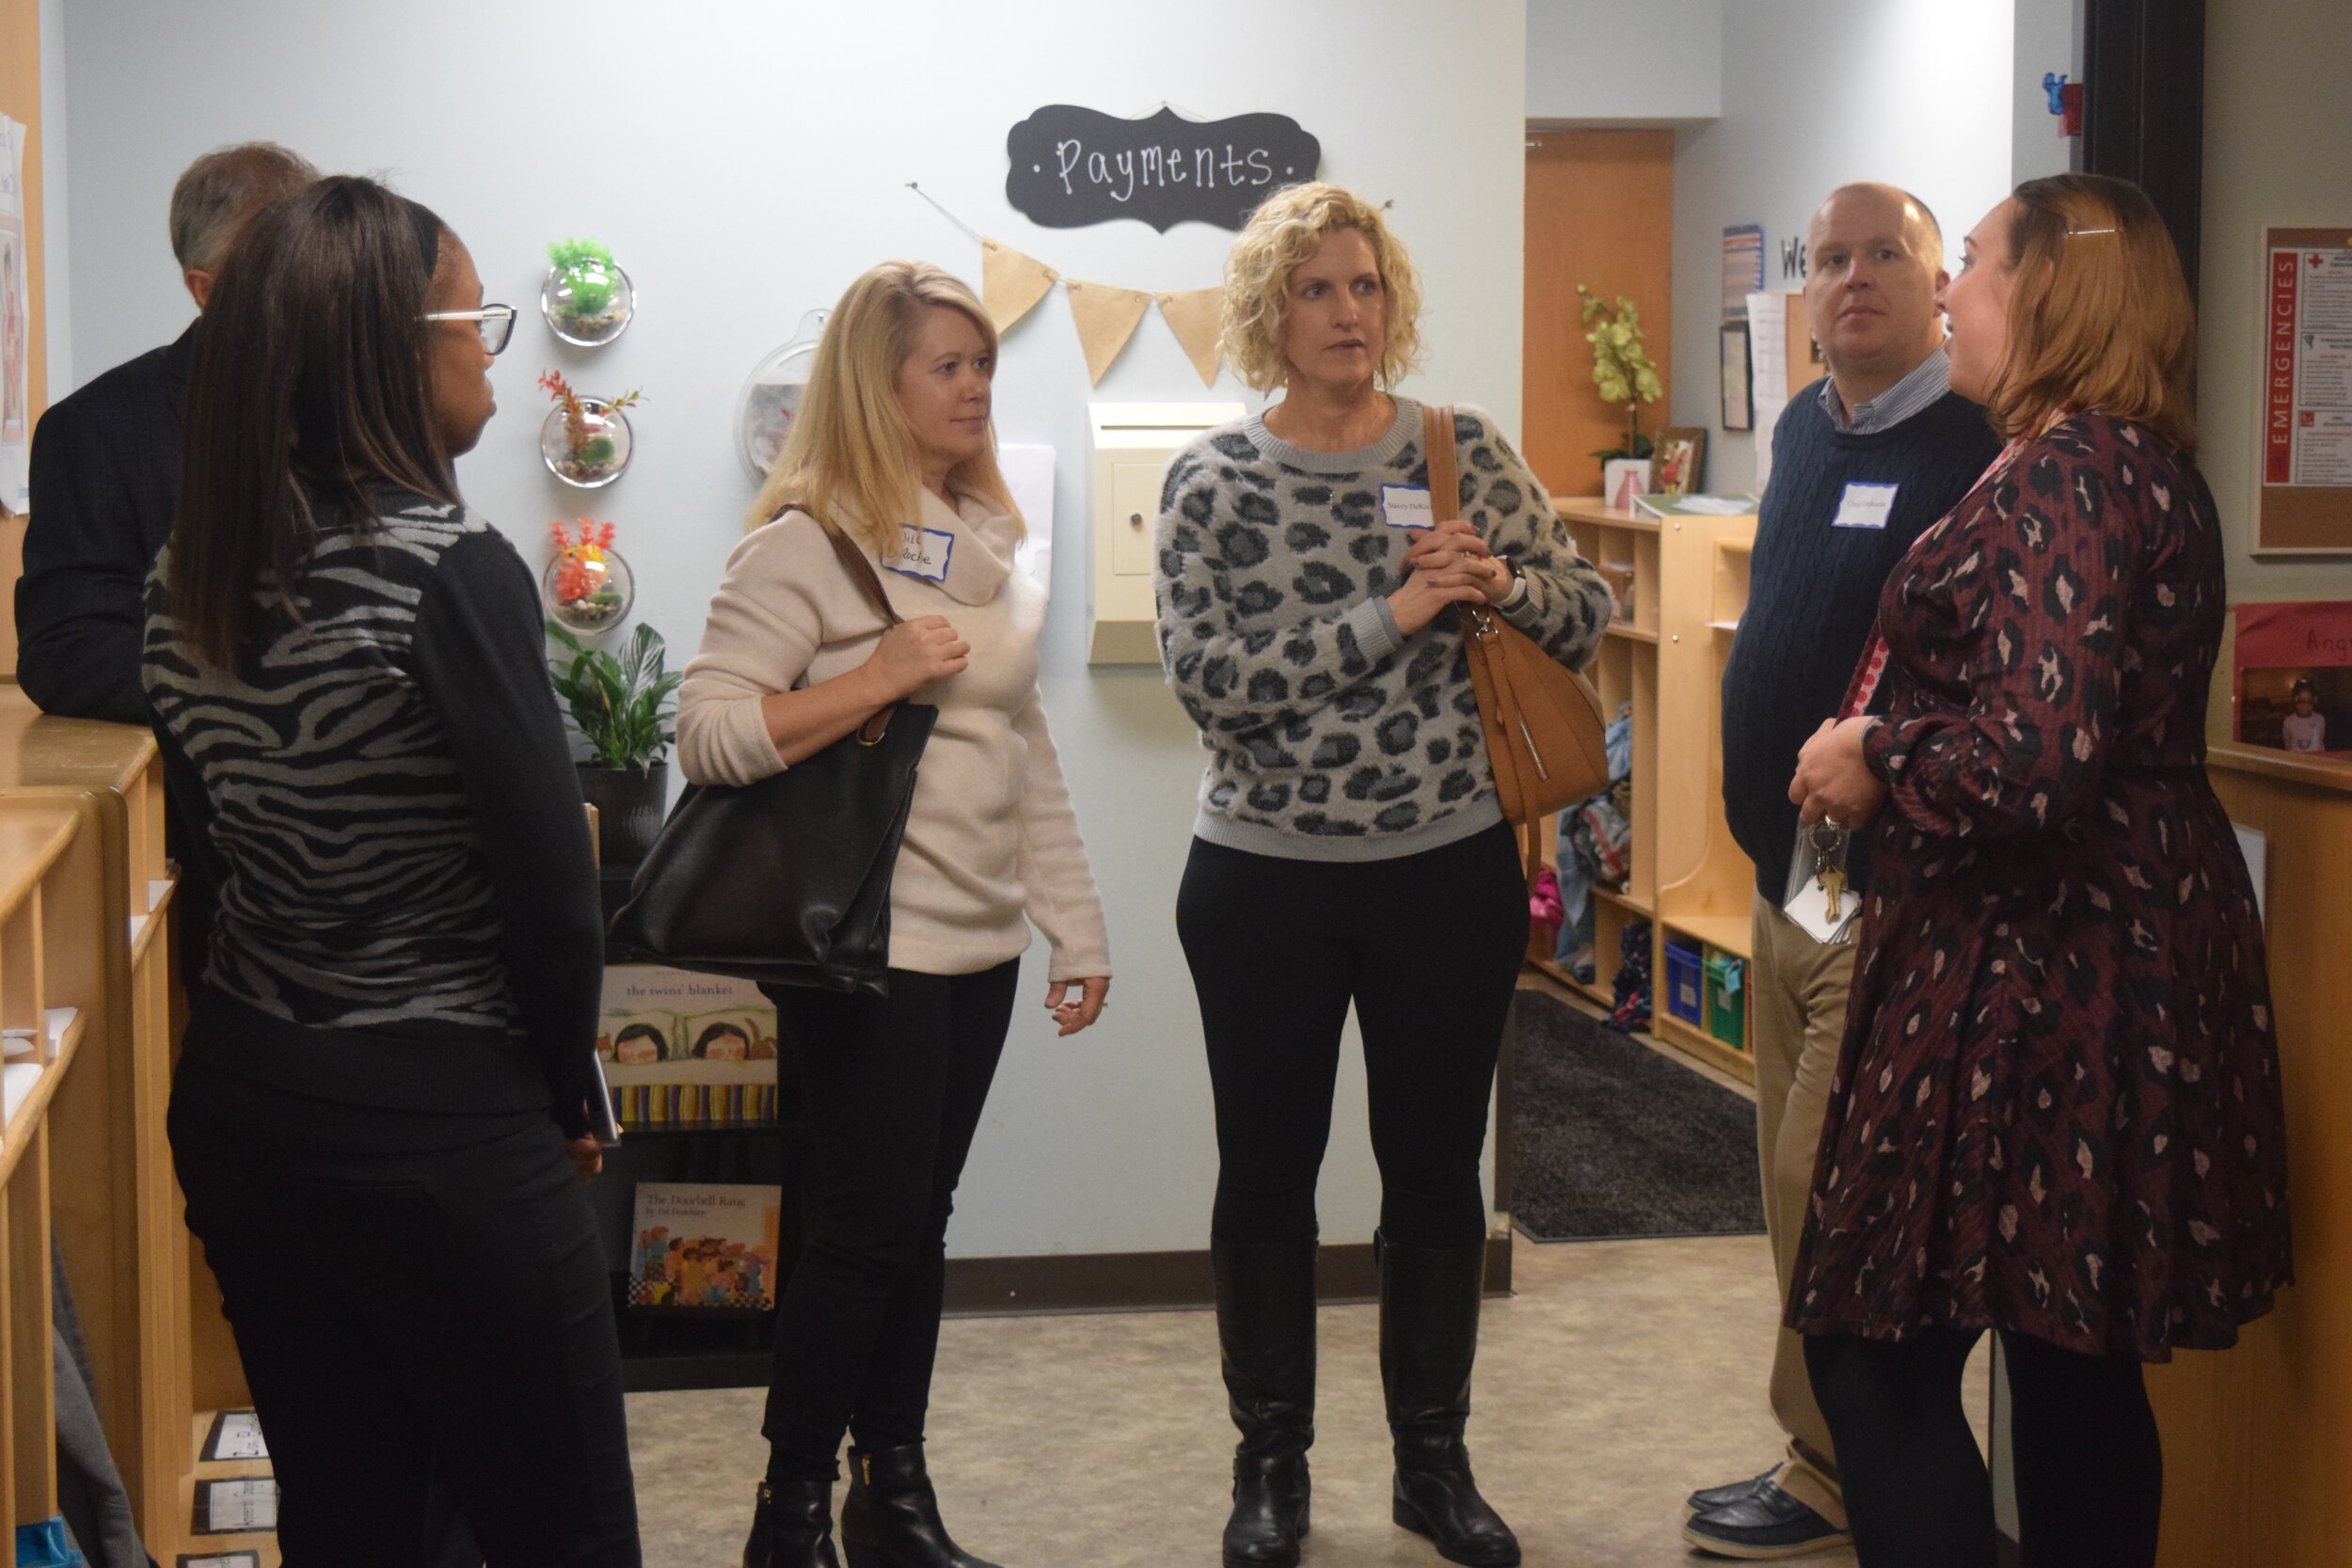 Lead Preschool Teacher Gail Petrusha (far right) gives guests a tour of the Children's Learning Center.